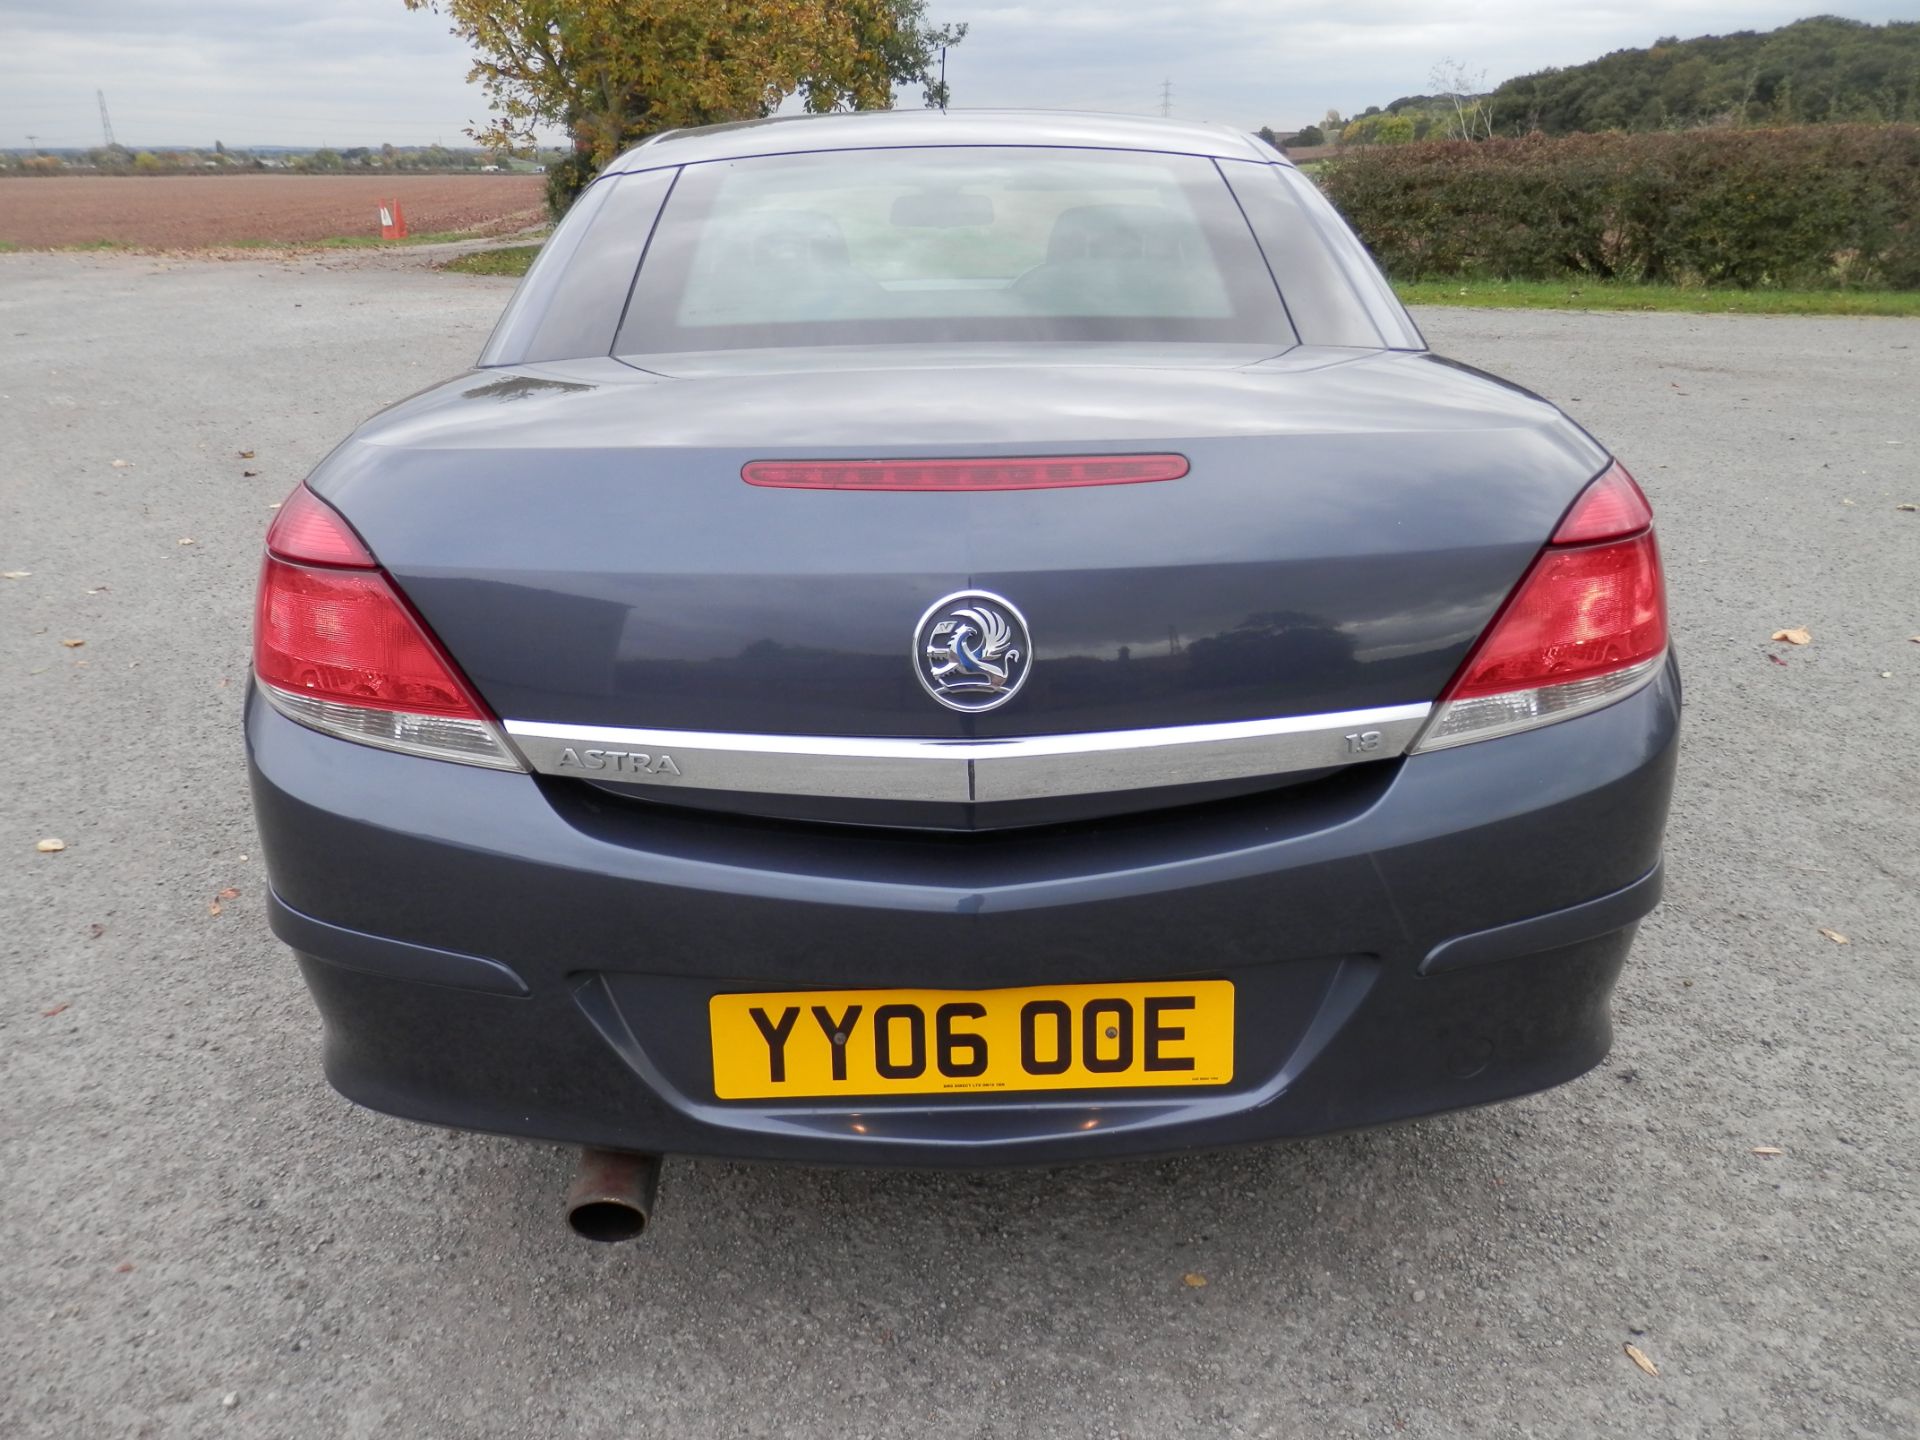 2006/06 VAUXHALL ASTRA DESIGN 1.8 SPORT TWIN TOP CONVERTIBLE, ONLY 62K MILES WARRANTED, MOT FEB 2017 - Image 6 of 24